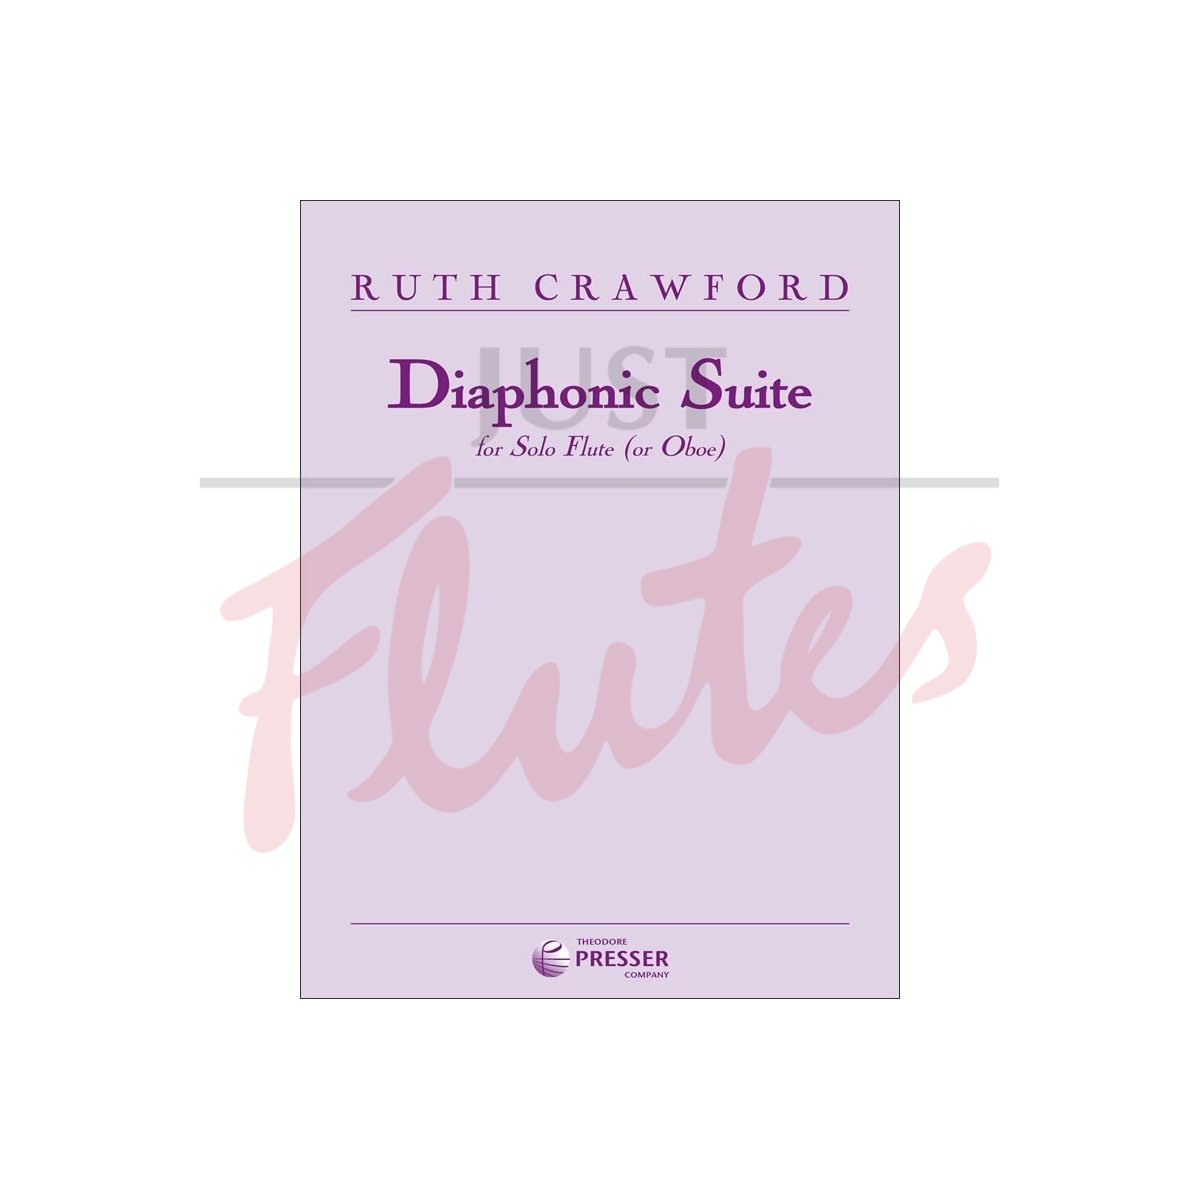 Diaphonic Suite for Solo Flute (or Oboe)